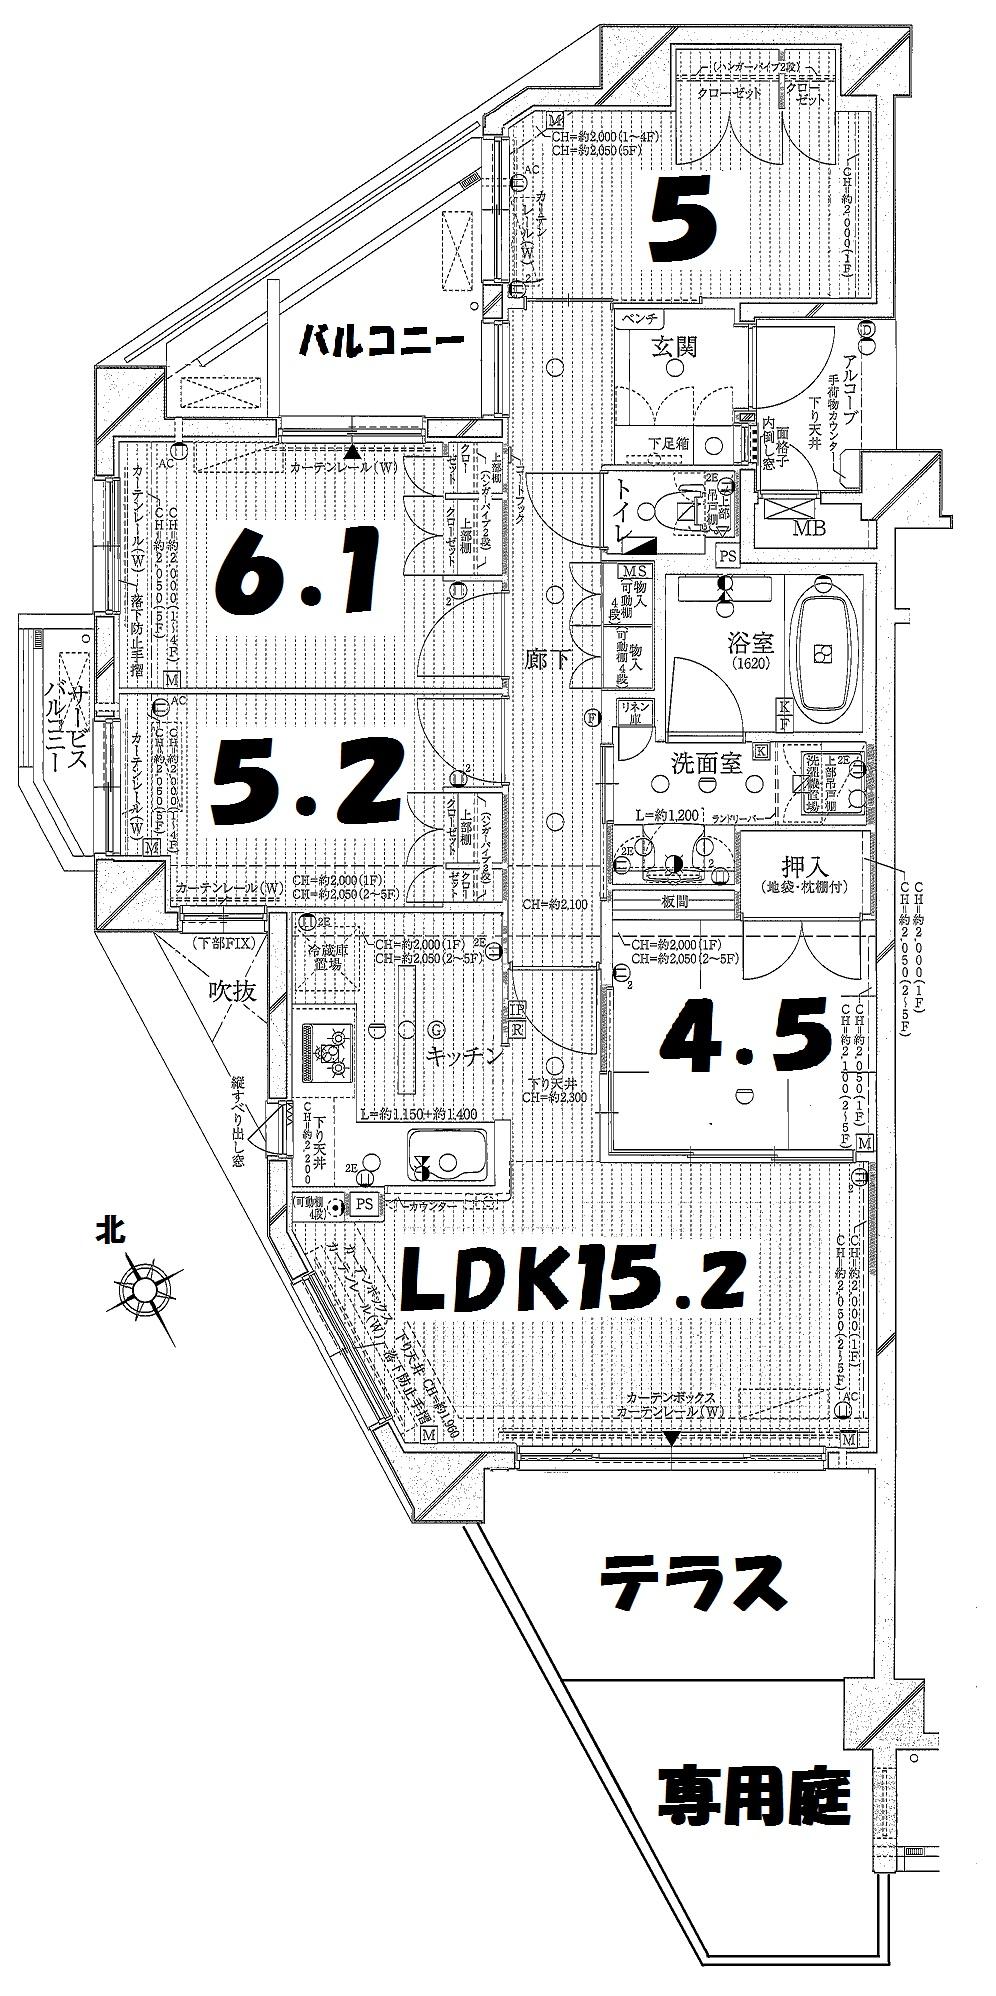 Floor plan. 4LDK, Price 31,900,000 yen, Occupied area 83.05 sq m , Balcony area 8.93 sq m south ・ North ・ It is west of the three-way free of the corner room!